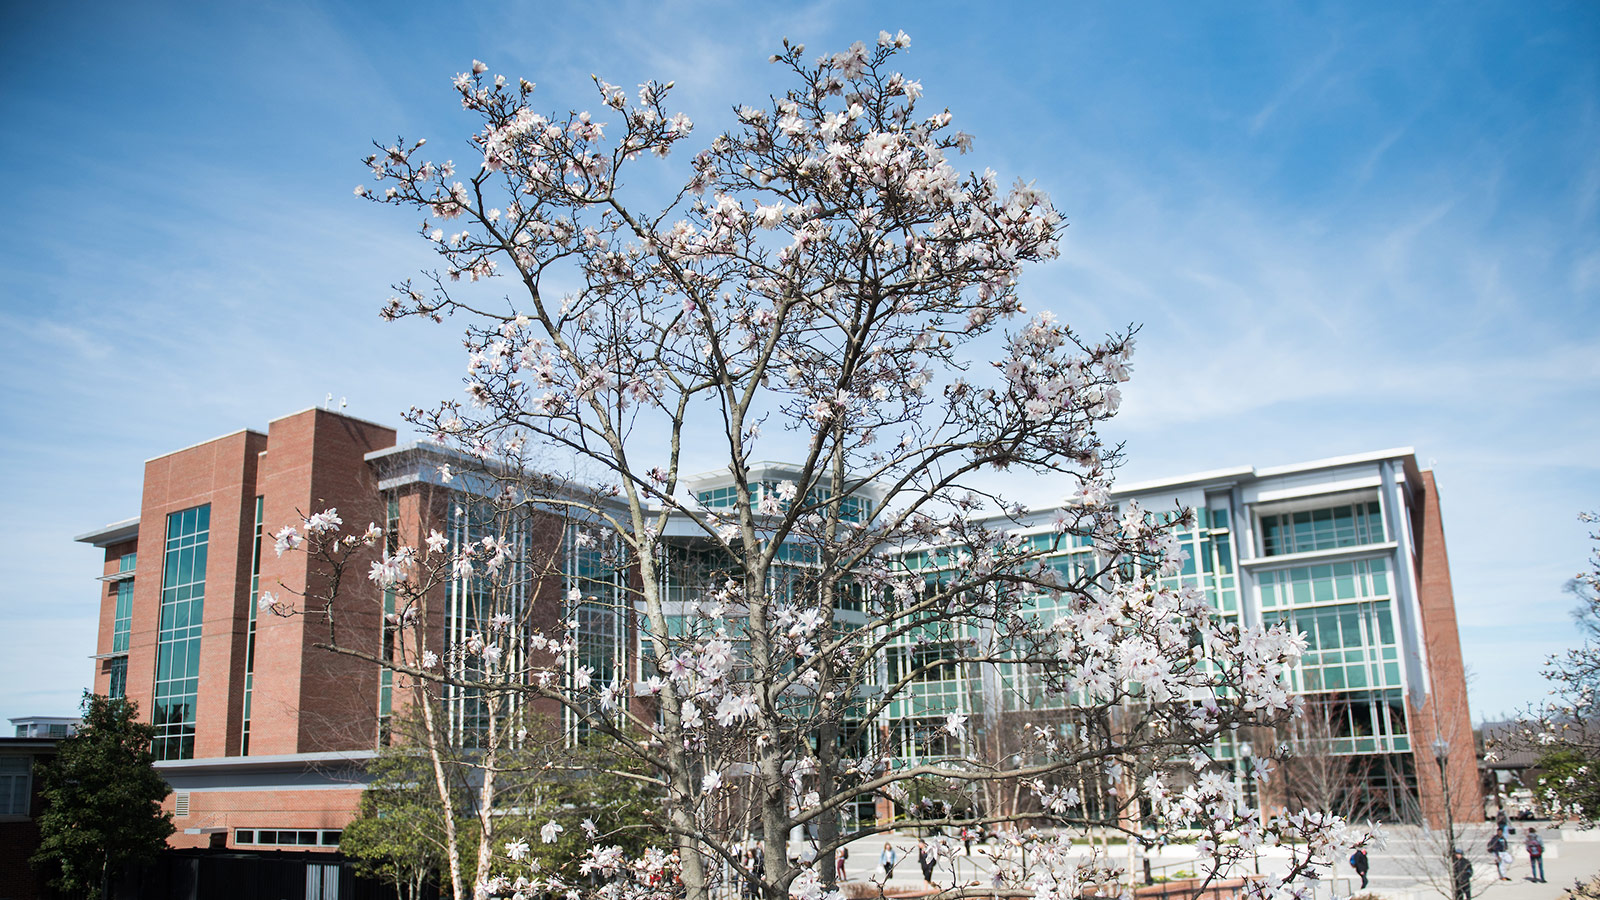 A tree flowers with blooms outside the U T C library